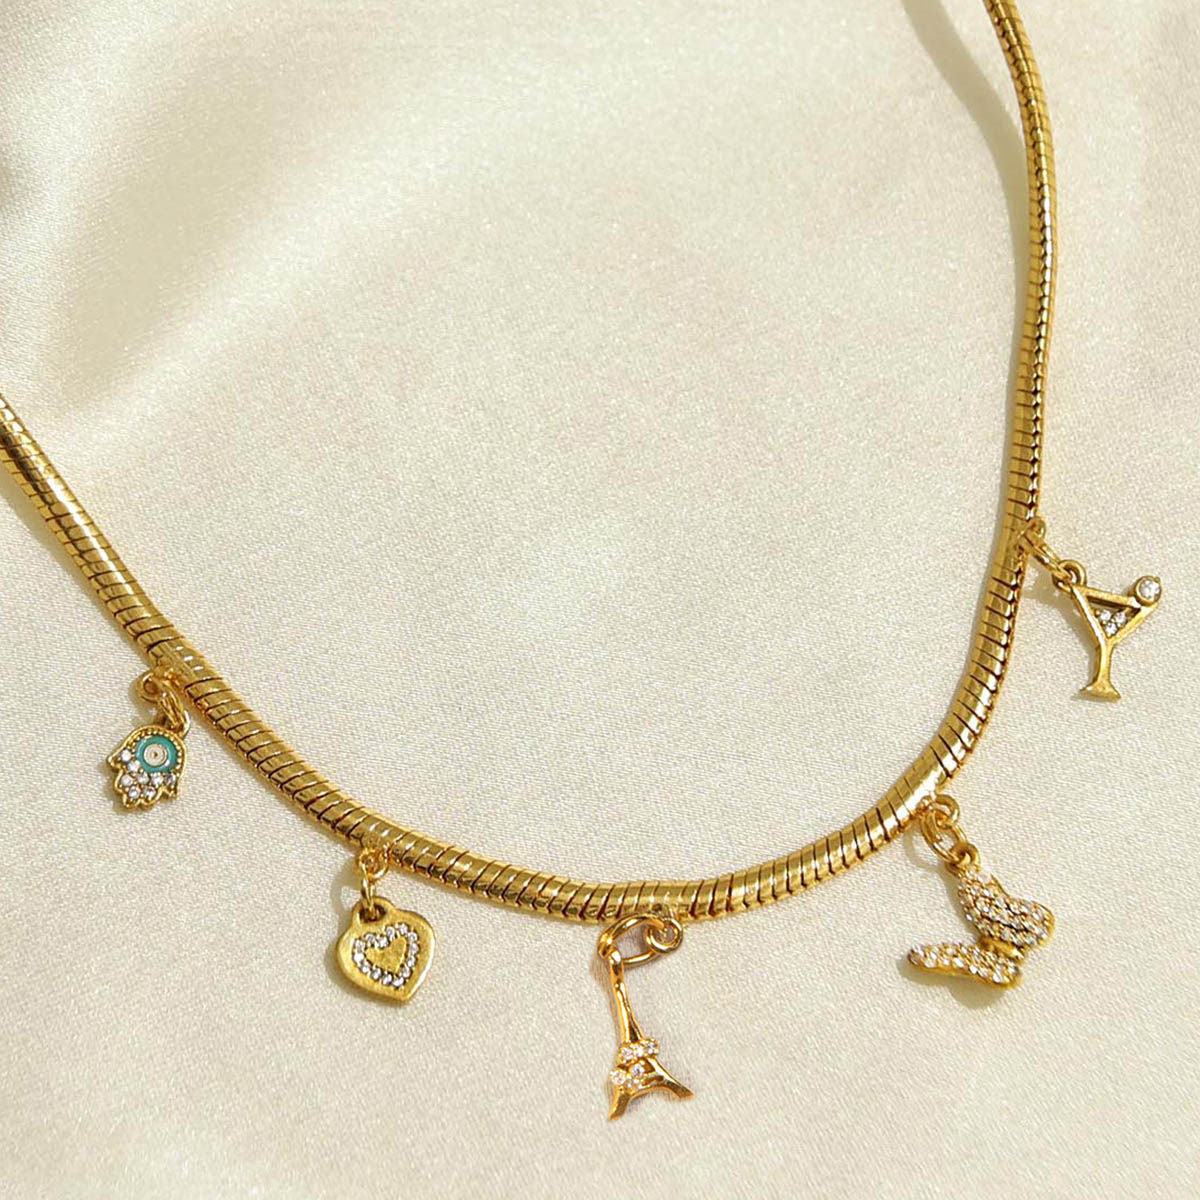 5 Charms Necklace